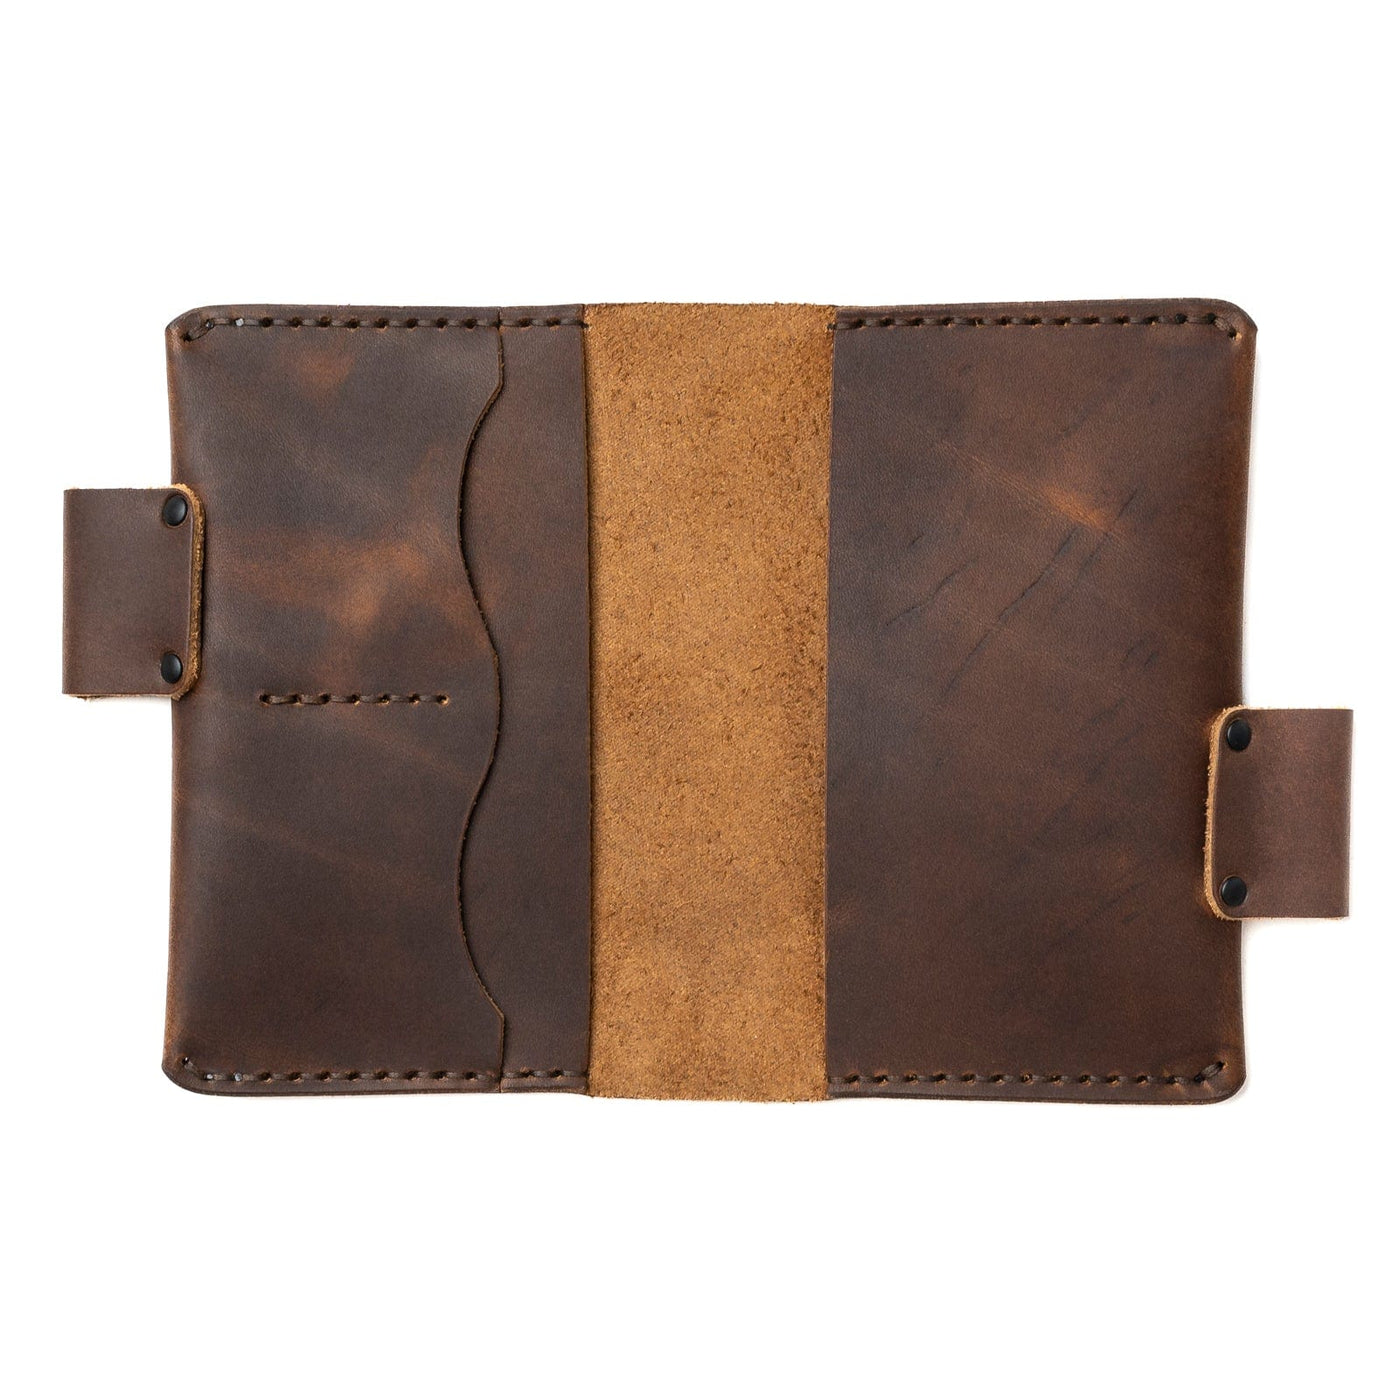 Leather Rhodia A6 Cover - Heritage Brown Popov Leather